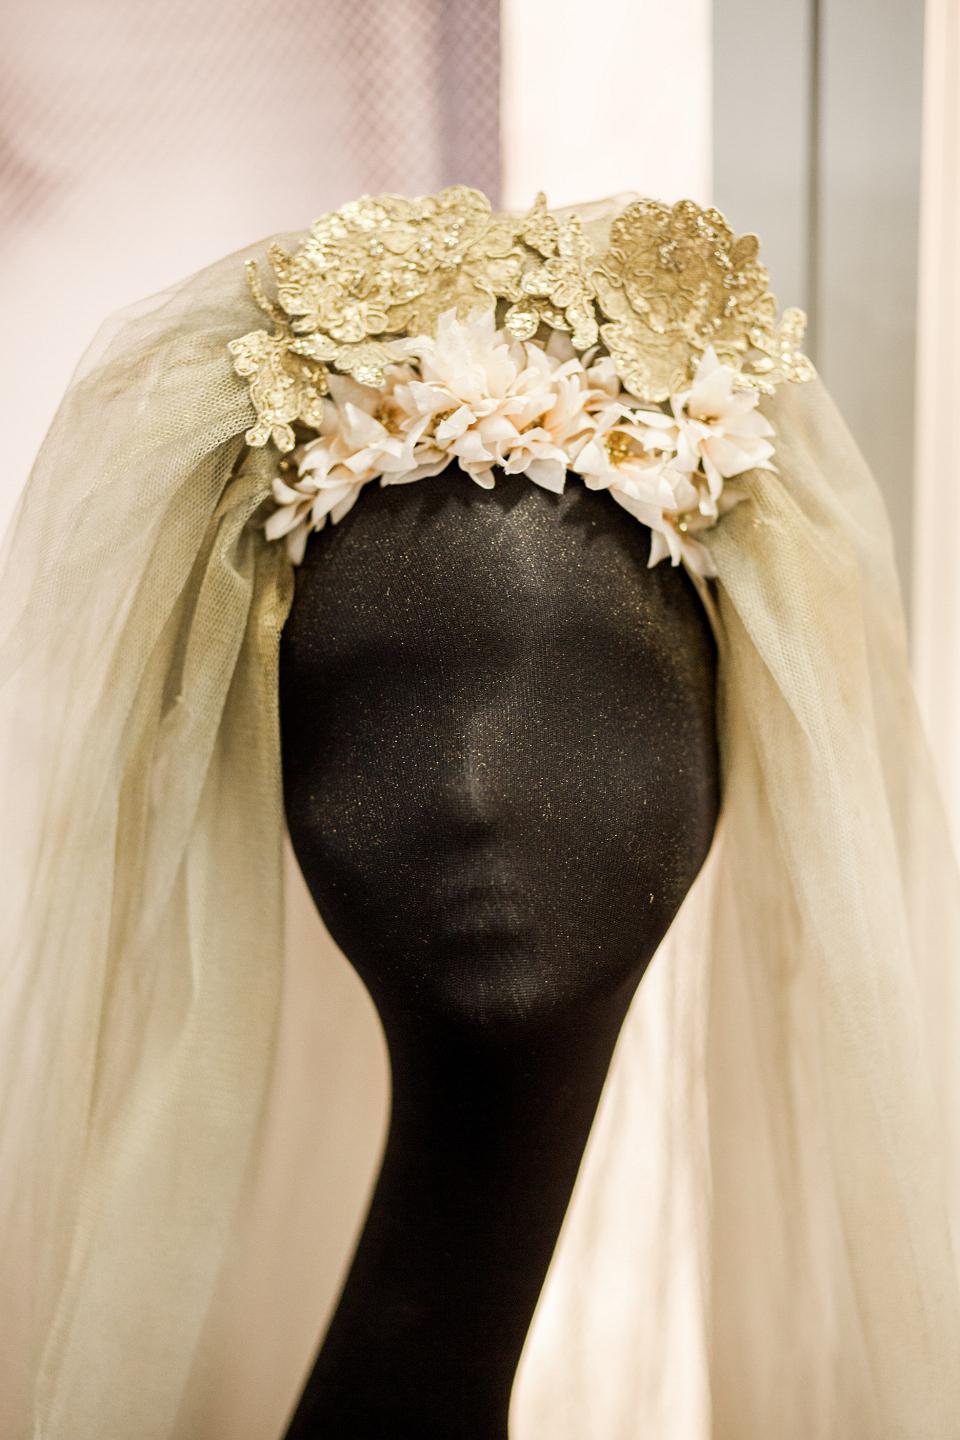 HT Headwear wedding accessories at The White Gallery, London, April 2014